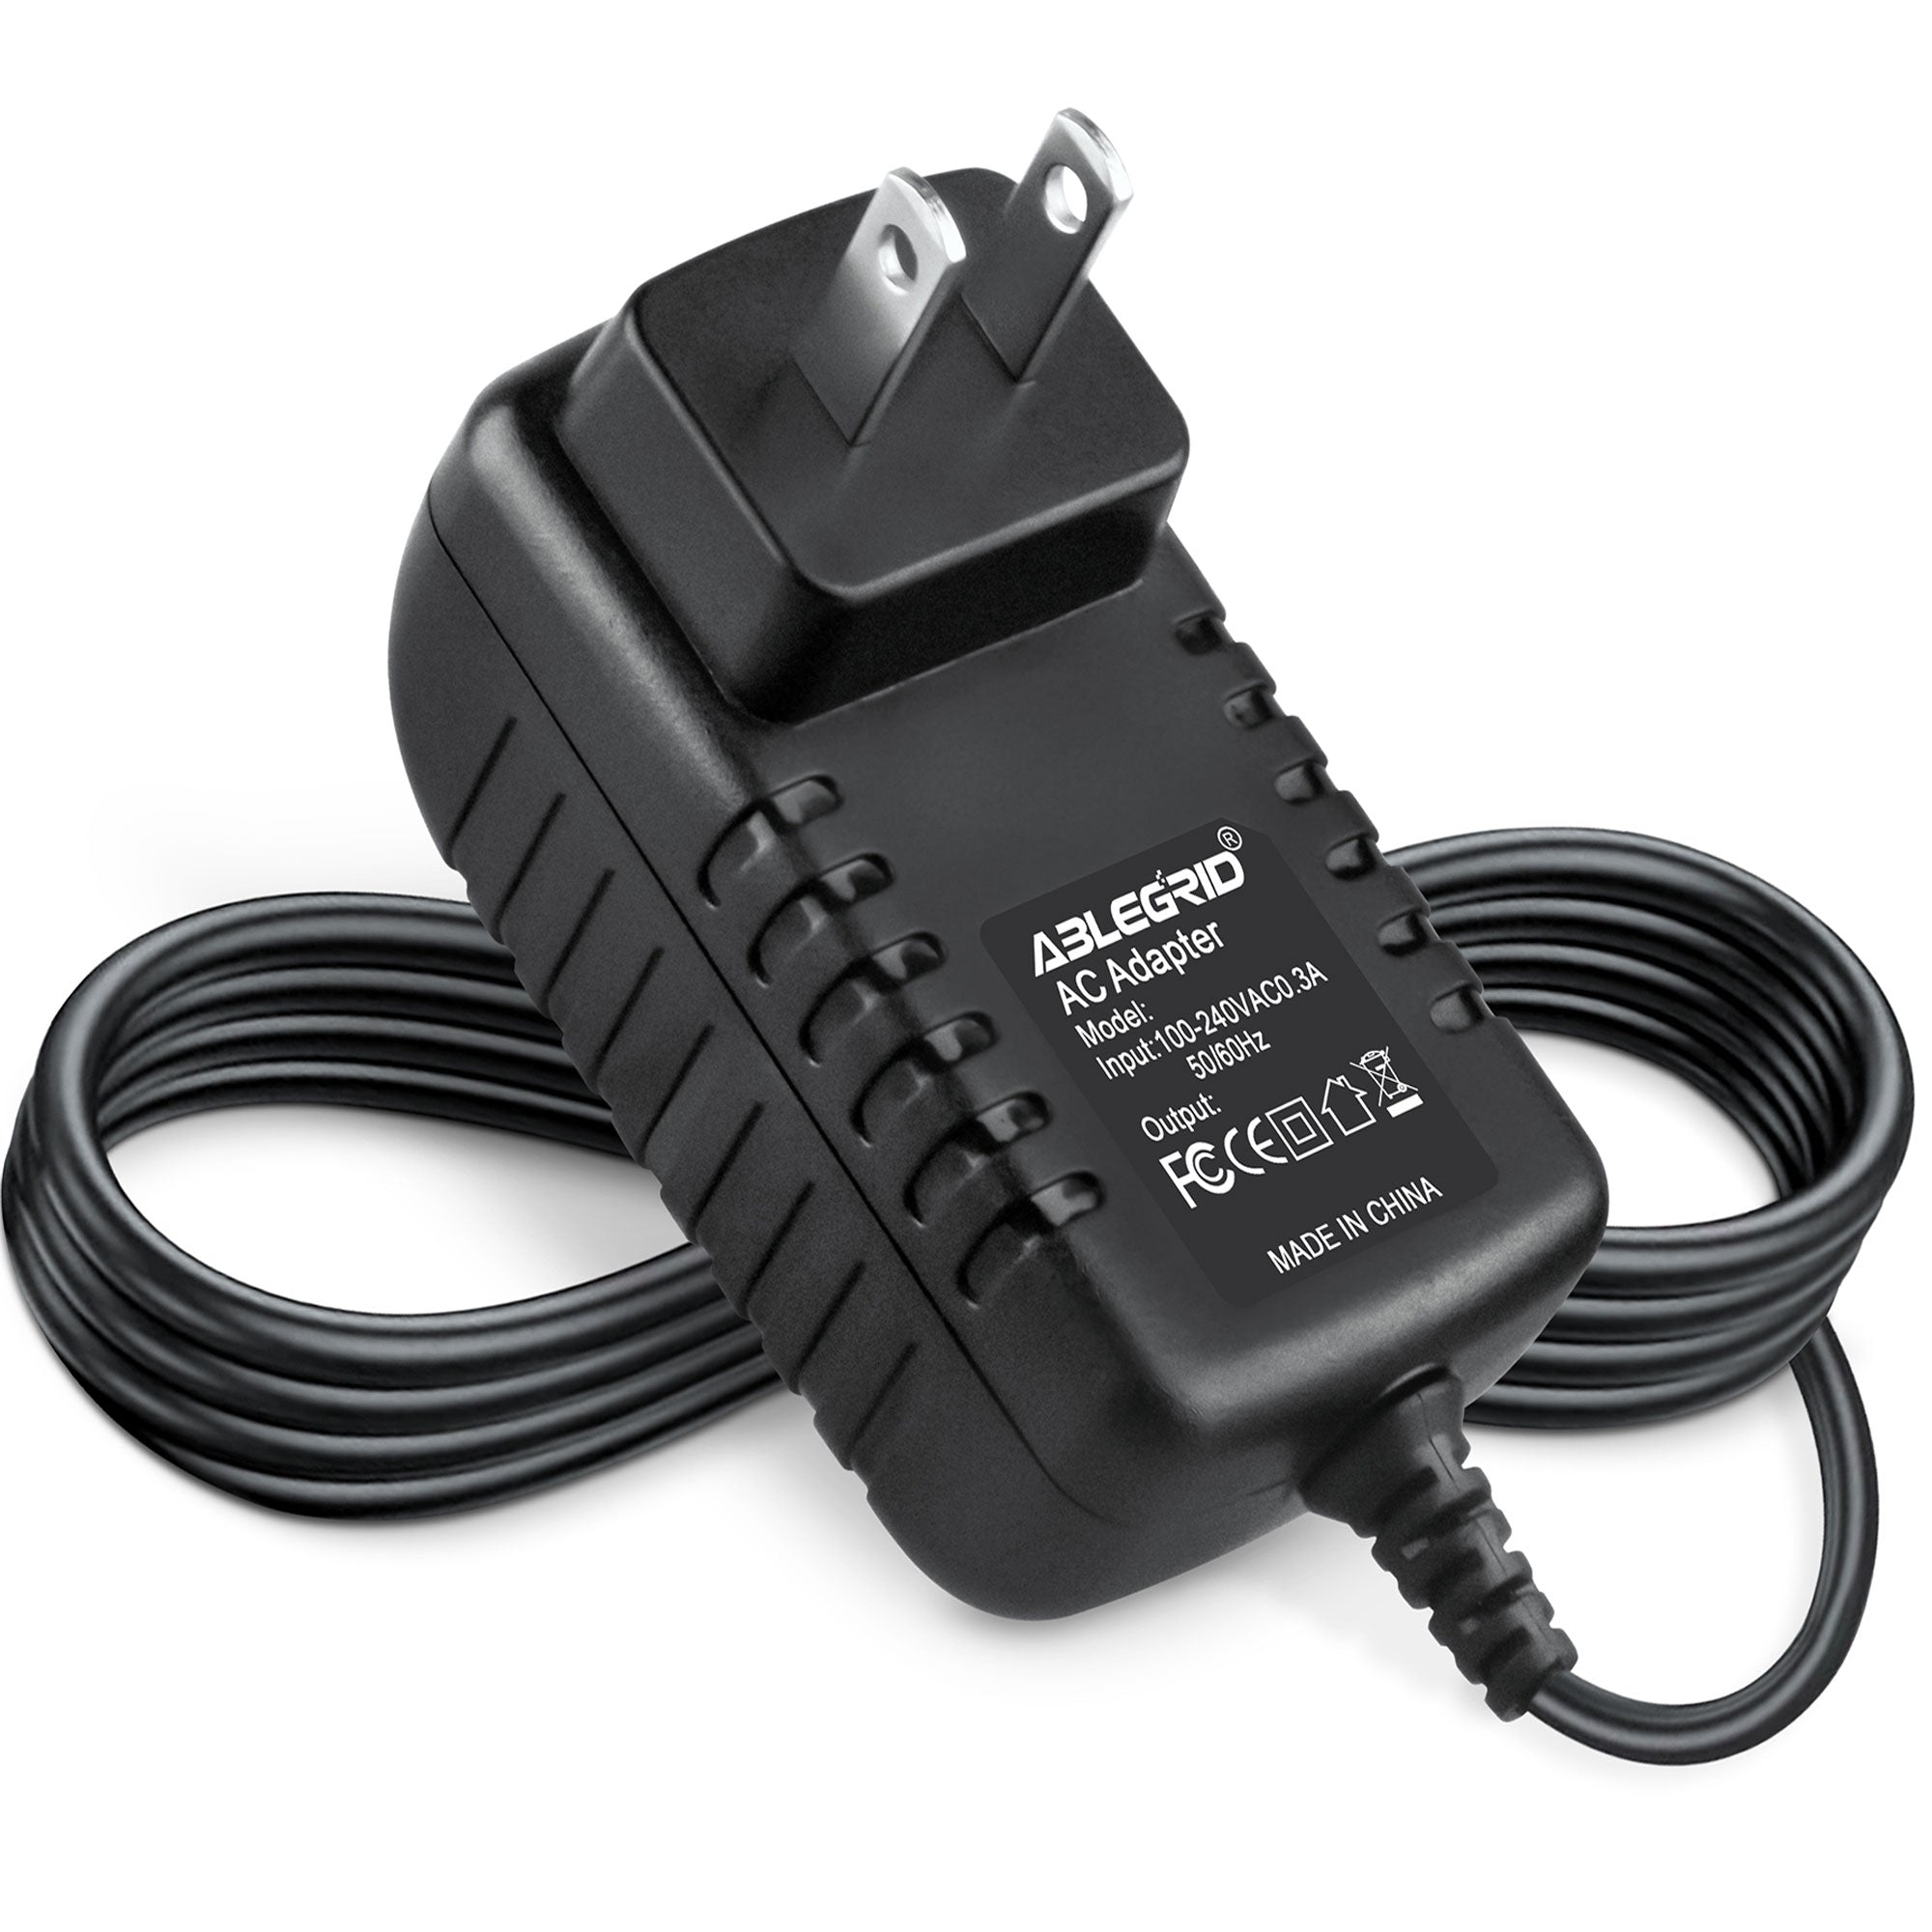 AbleGrid AC-DC Adapter for Mackenzie Dynavox DV850 DV-850 Series Digital Autoload Message-ON-Hold System Power Supply Cord Cable PS Wall Home Charger Input: 100 - 240 VAC Worldwide Use PSU